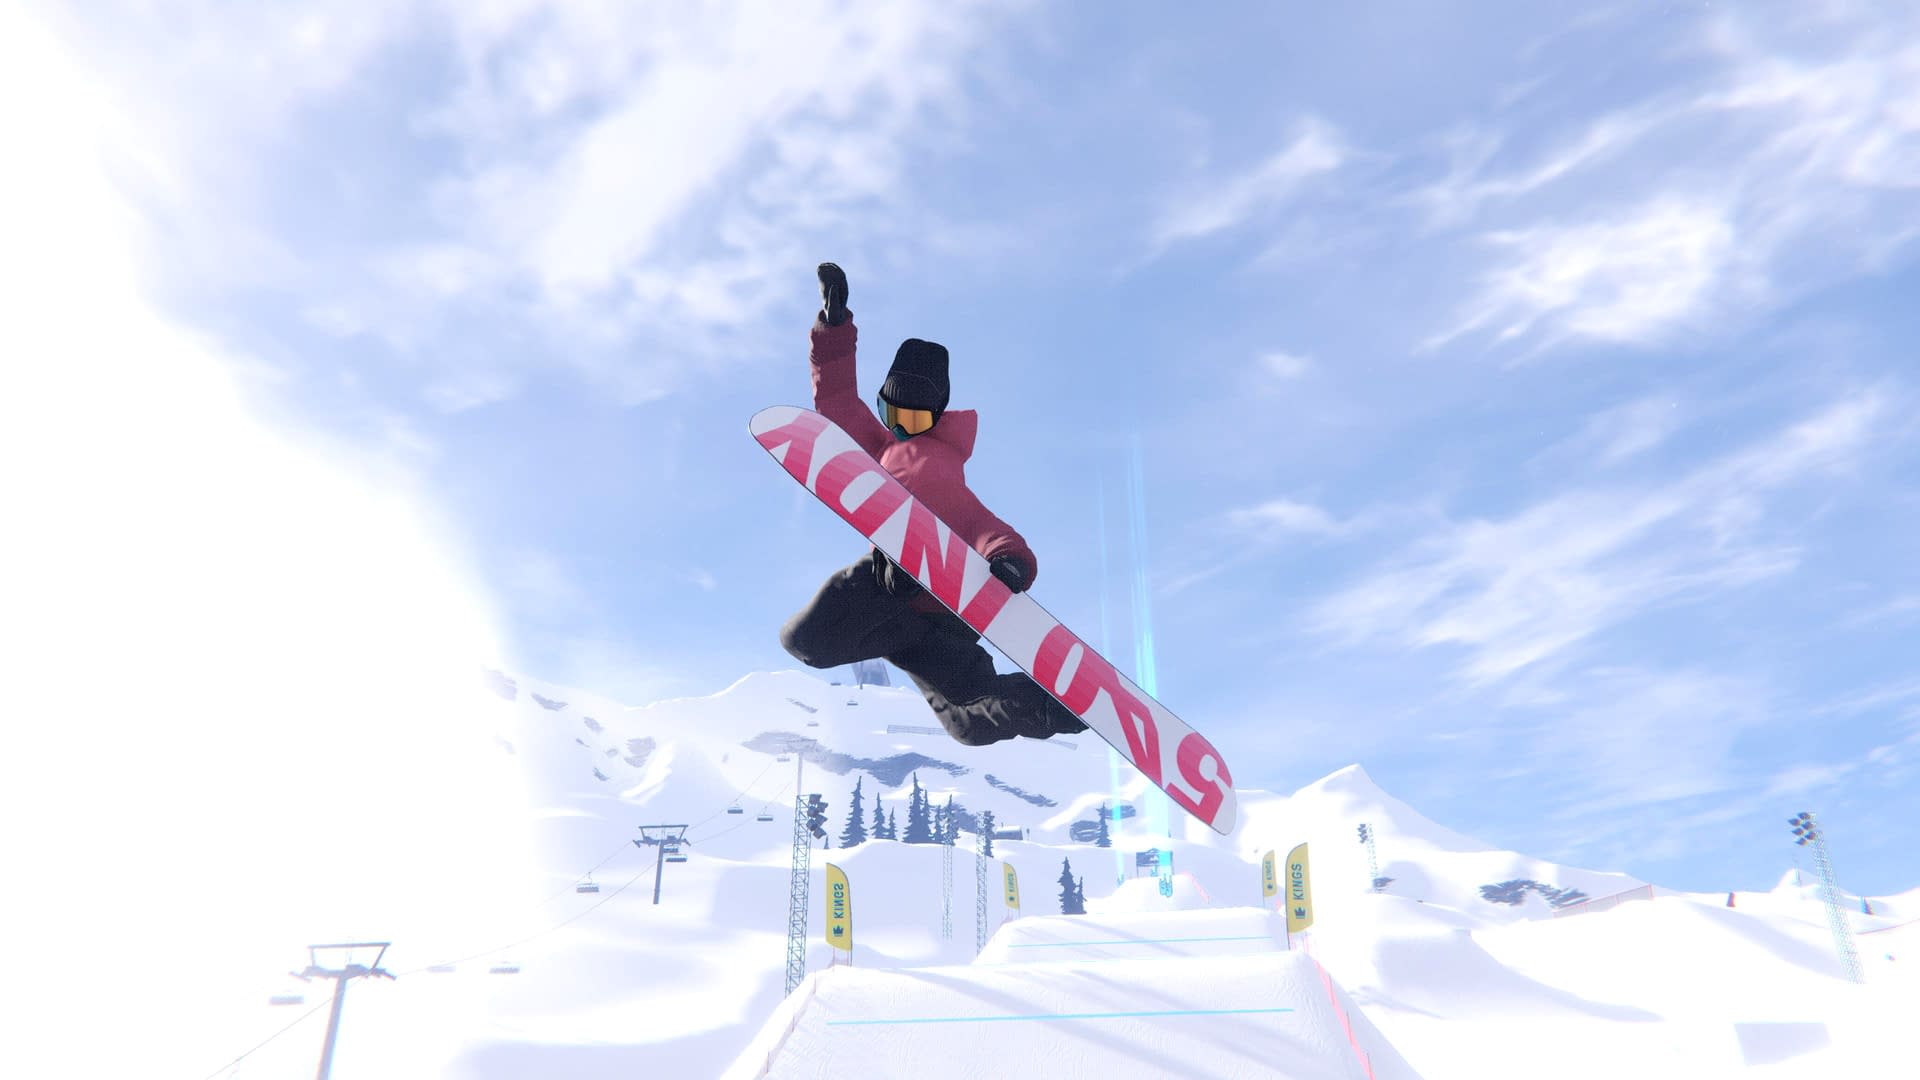 Sports Game Shredders Coming to PS5 Consoles